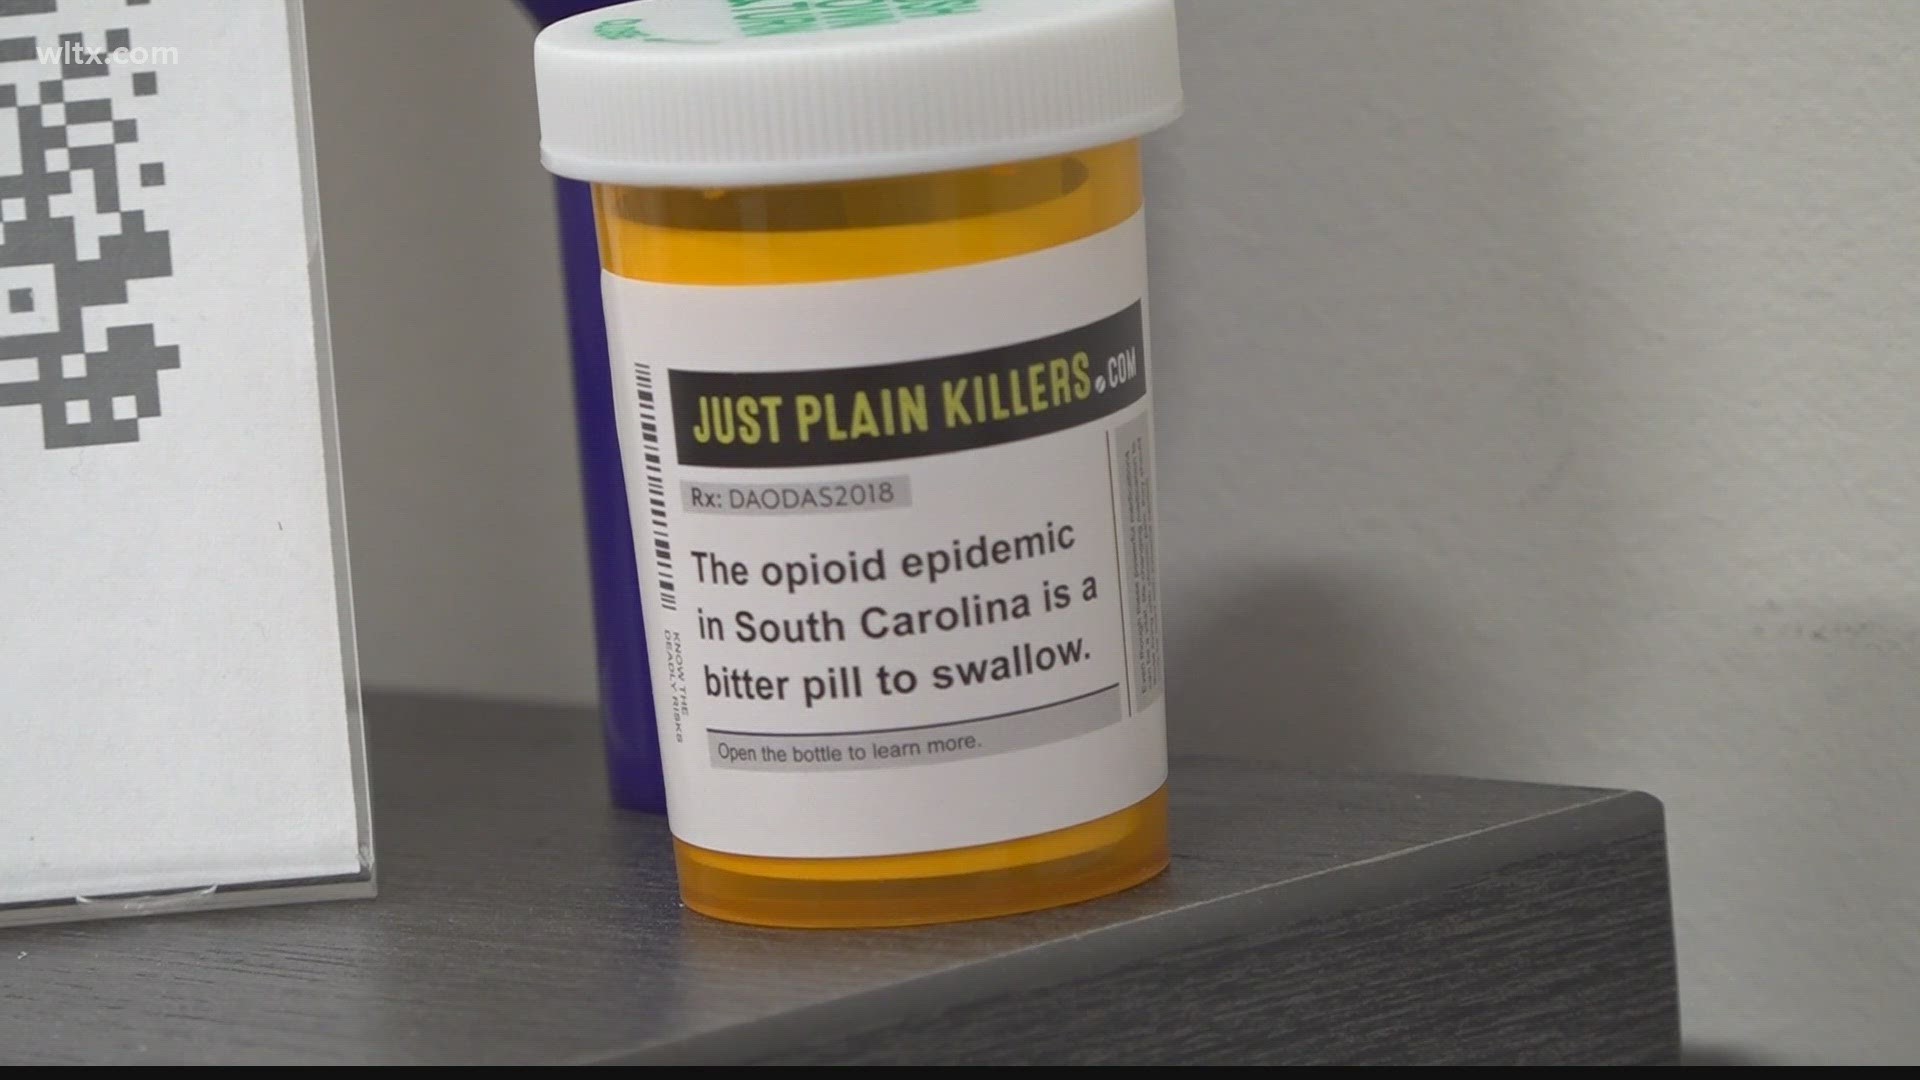 It's been over a year since funds from a multi-million dollar opioid settlement began flowing into the state.